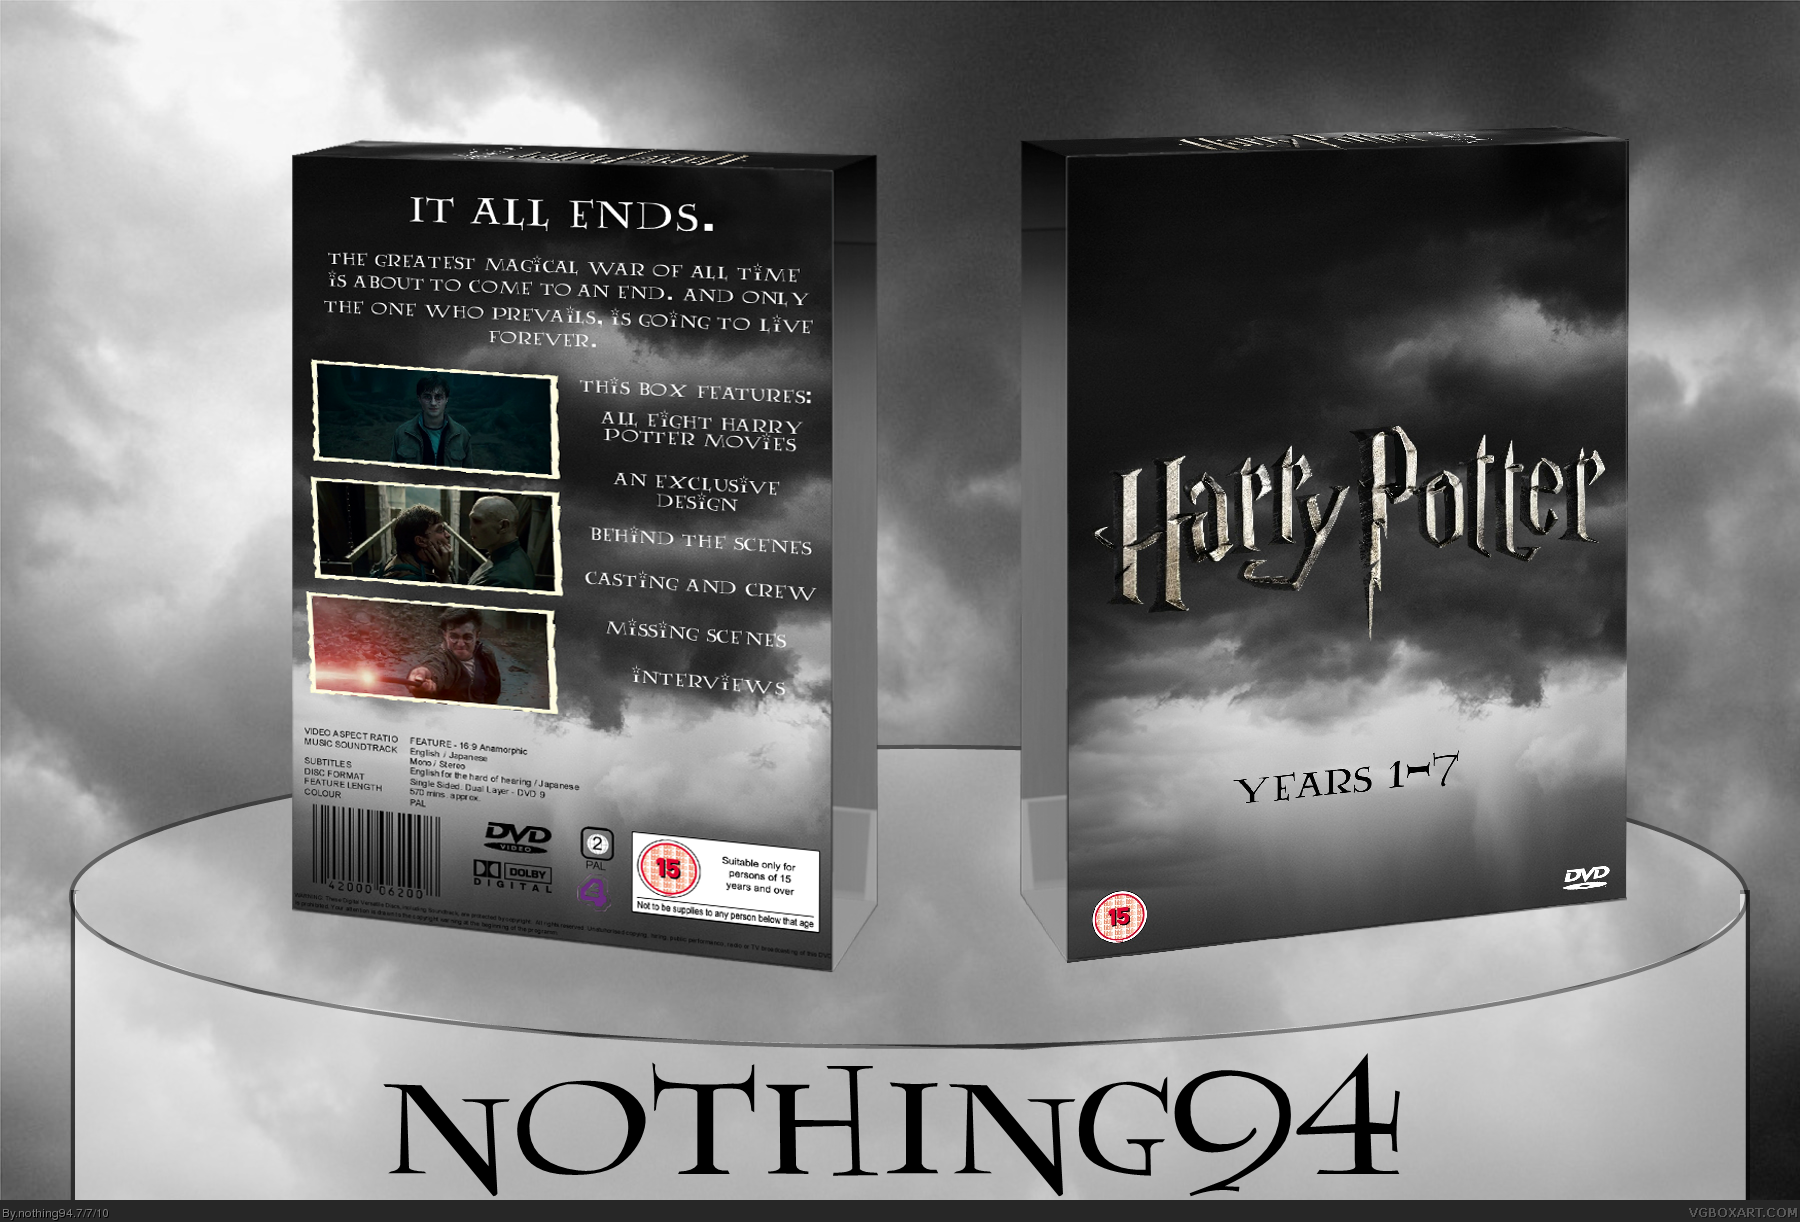 Harry Potter and the Deathly Hallows Collection box cover